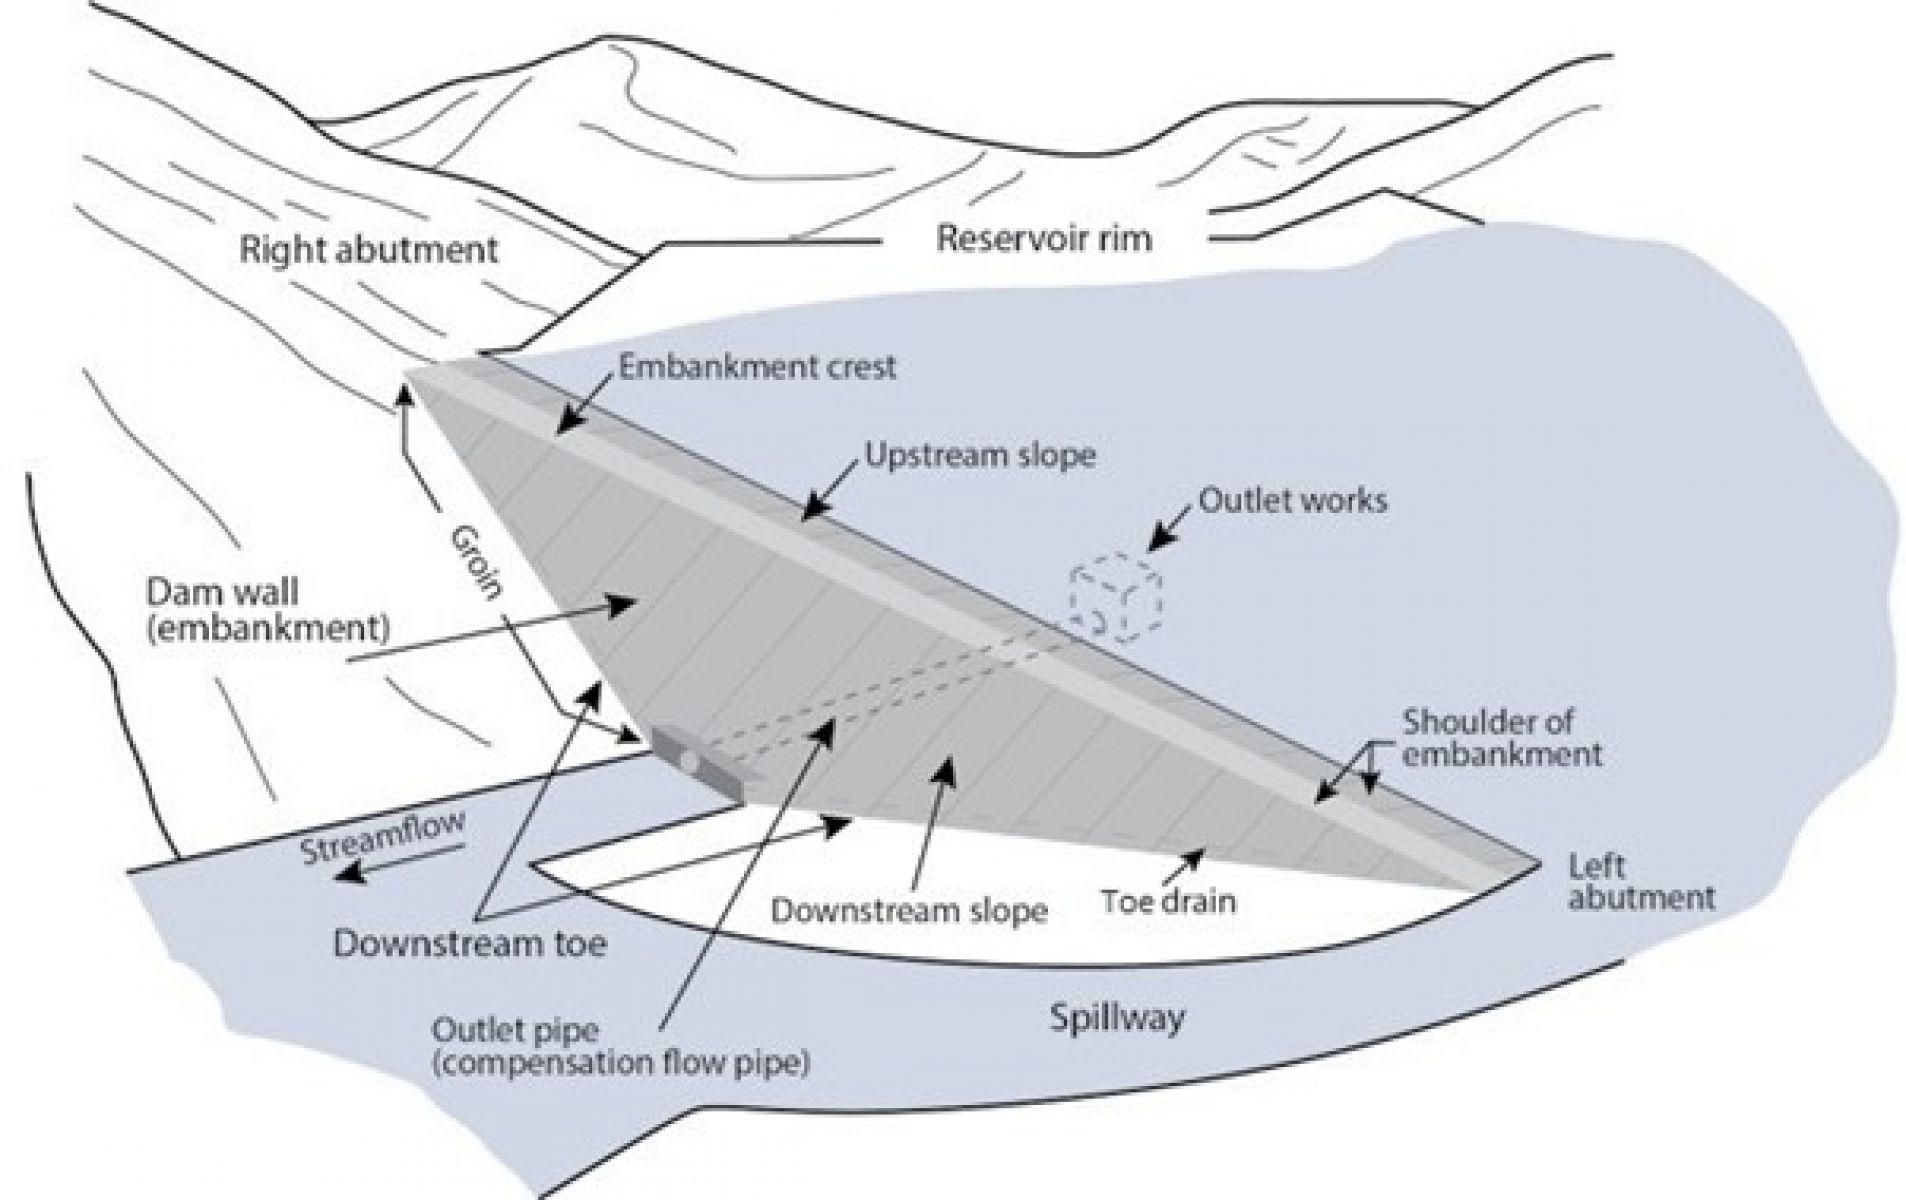 Dam schematic image highlights the primary features of a dam. The spillway can be found at the left or right abutment, or both as appropriate. The convention for left and right sides of a dam is determined when looking downstream at the crest of the dam